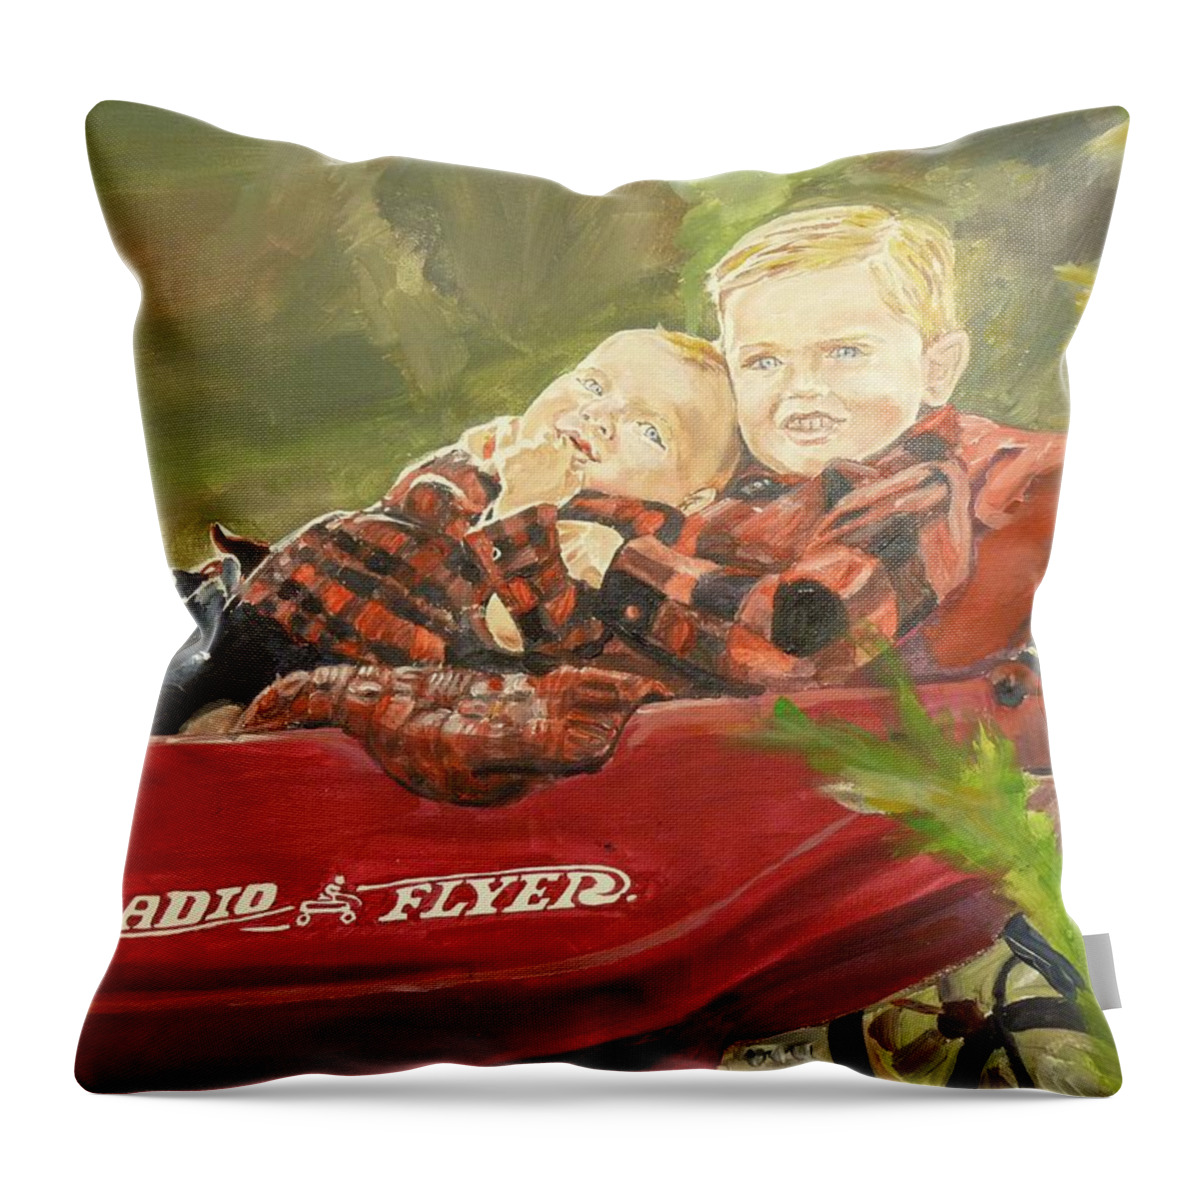 Portrait Throw Pillow featuring the painting Radio Flyer by Bryan Bustard